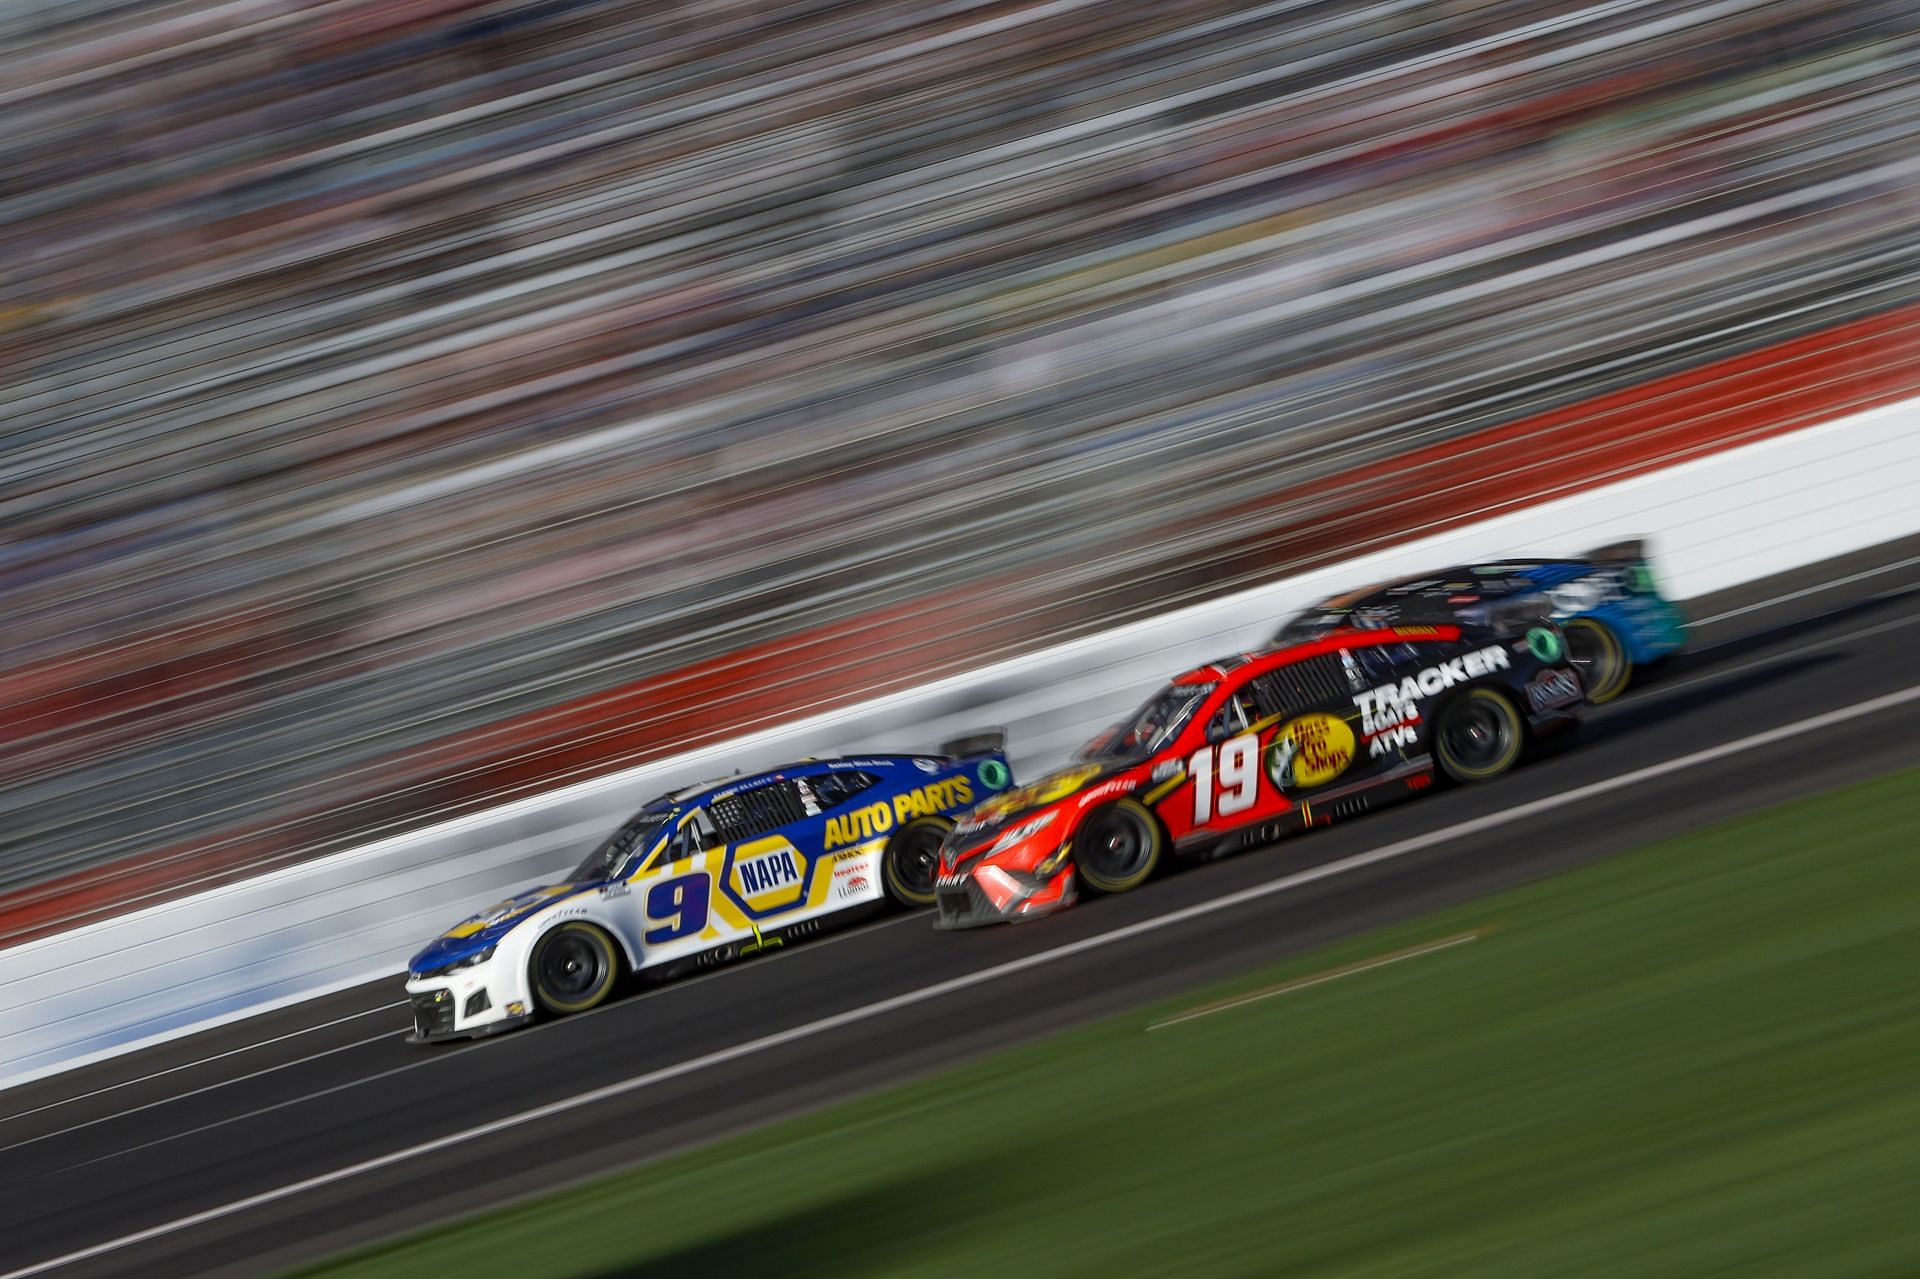 Chase Elliott and Martin Truex Jr. race during the 2022 NASCAR Cup Series Folds of Honor QuikTrip 500 at Atlanta Motor Speedway in Hampton, Georgia. (Photo by Sean Gardner/Getty Images)